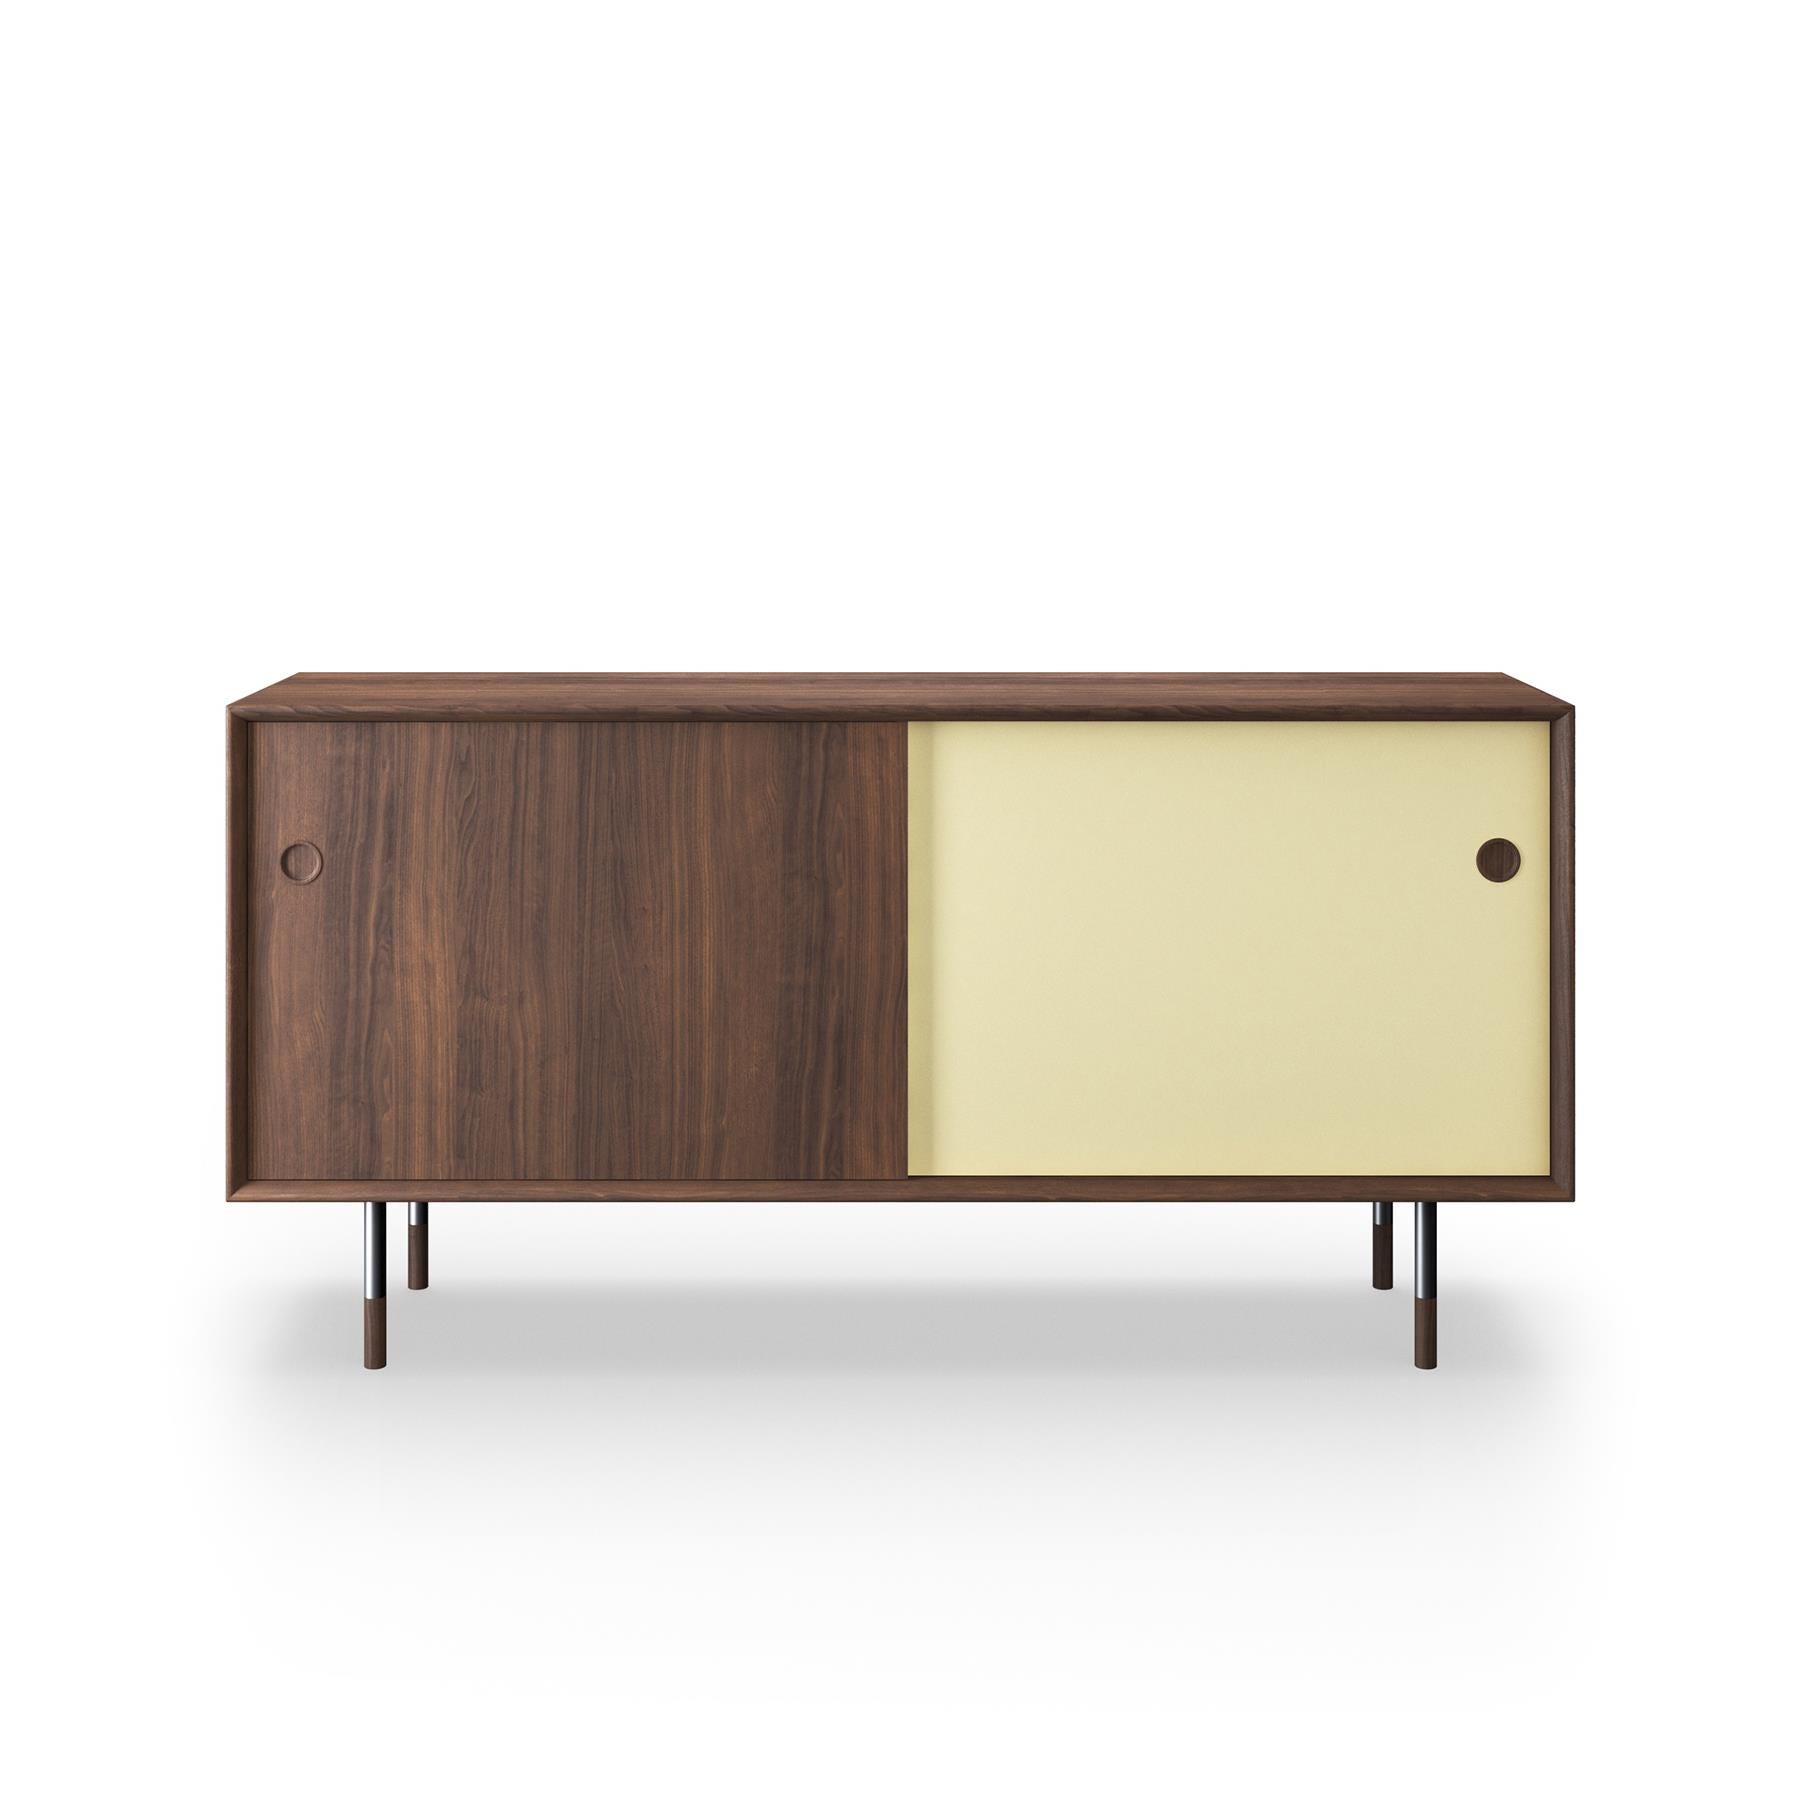 Sibast No 11 Sideboard Walnut Yellow And Natural Front Metal Legs Dark Wood Designer Furniture From Holloways Of Ludlow